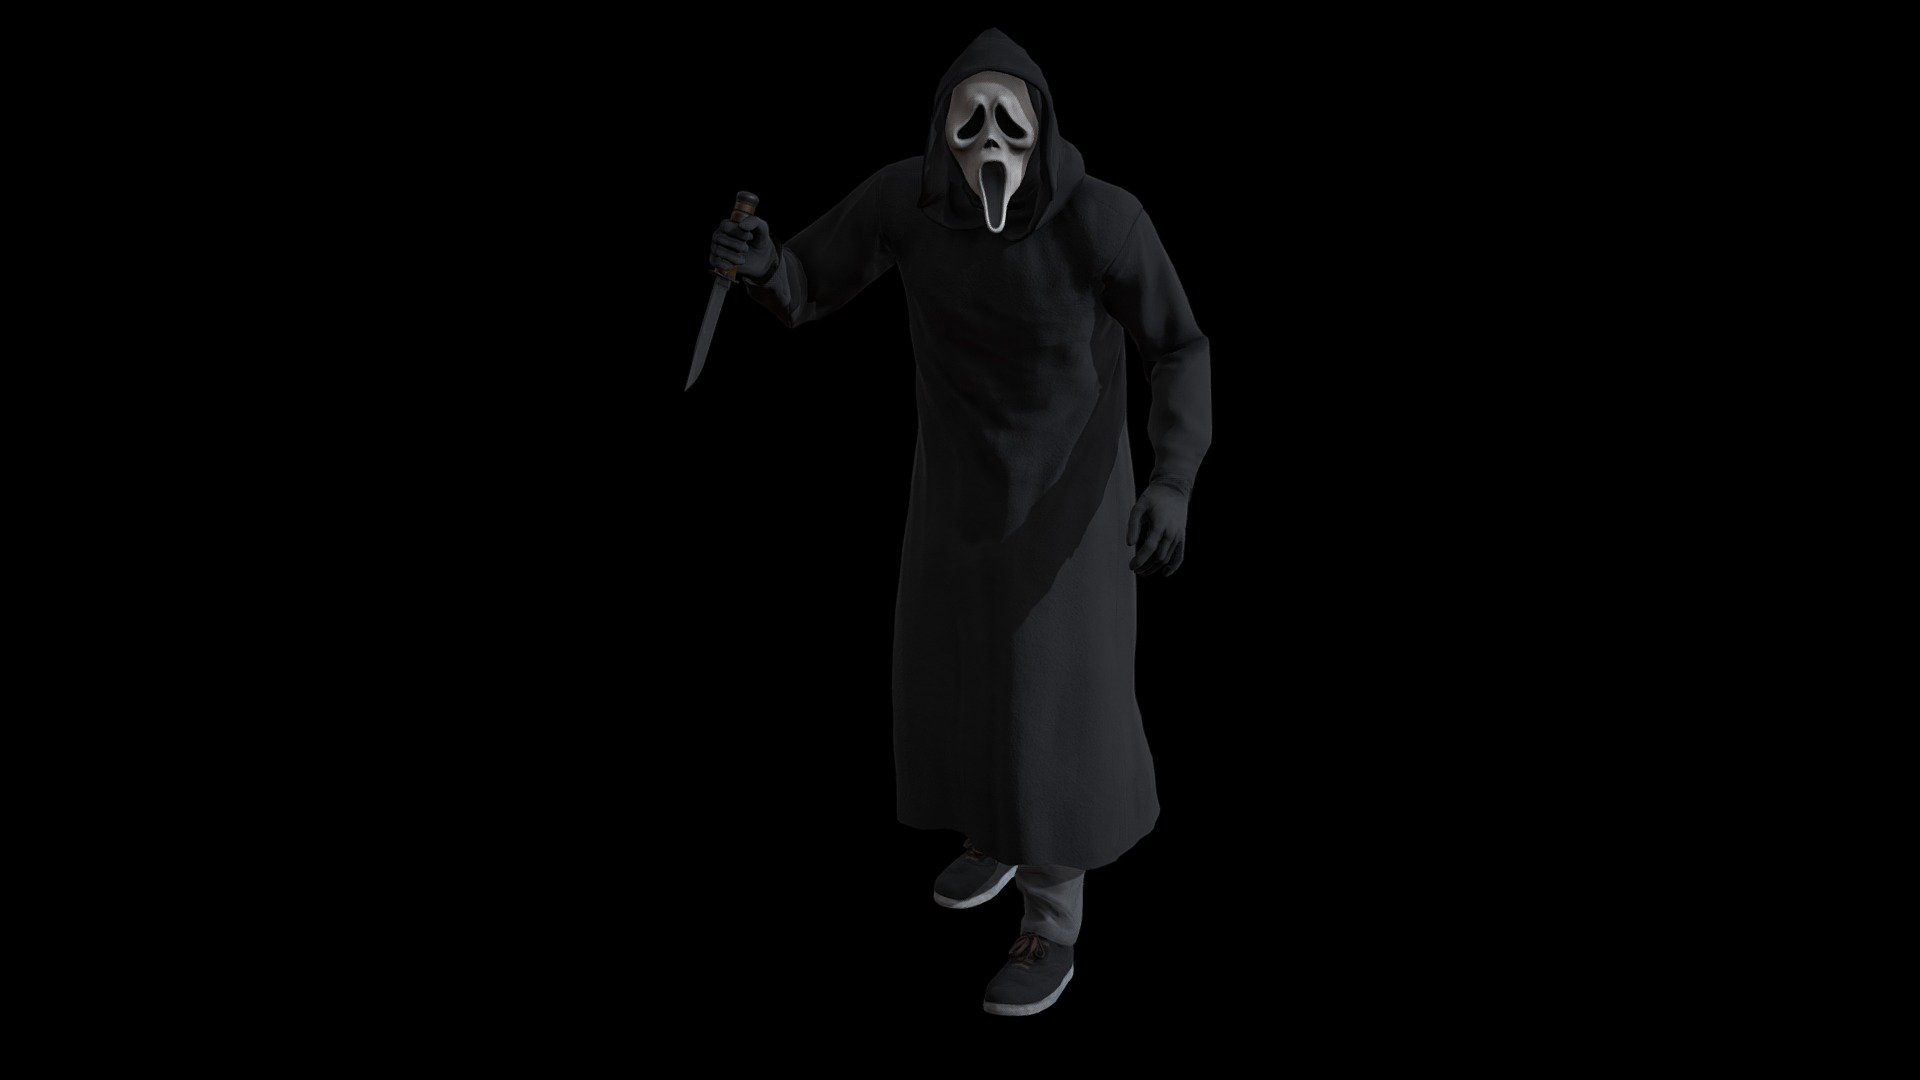 Ghostface:
Complete archive in additional file.

Character in A-pose ( Game Version).




High details.

Highres unique textures.

Rigged.

Exported to Unreal ( migrate files). Use same standard unreal mannequin skeleton. Can handle the same animations as Unreal mannequin from marketplace.

Highres Texturesets.

Professional Uv Layout.

Character mesh.

3d Game Ready Samurai Warrior Character.

High detail and realistic model.



Rigged, with high definition textures.

Texture types:




Albedo (Diffuse).

Normal.

Roughness.

Metallness.

ORM(Unreal Engine).
 - Ghostface (Scream) Character PBR Game Ready - Buy Royalty Free 3D model by lidiom4ri4 3d model